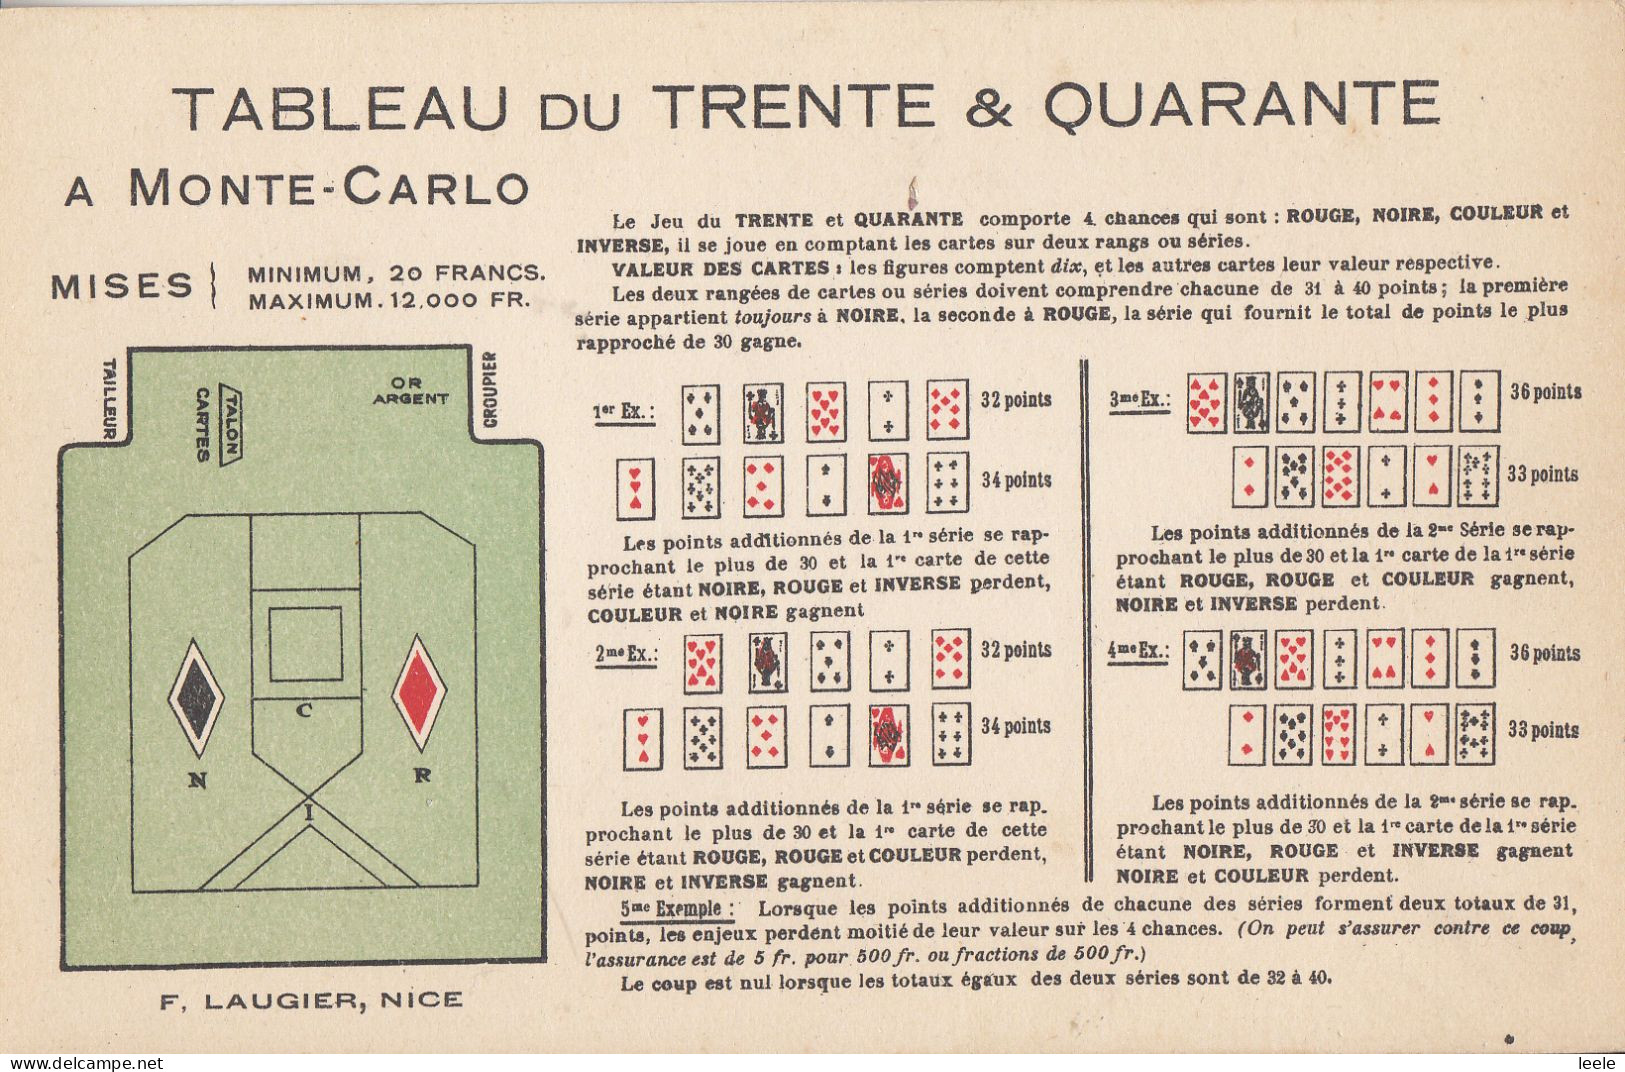 CK41. Vintage Postcard. Tableau De Trente And Quarante A Monte-Carlo. Gambling. Cards - Playing Cards